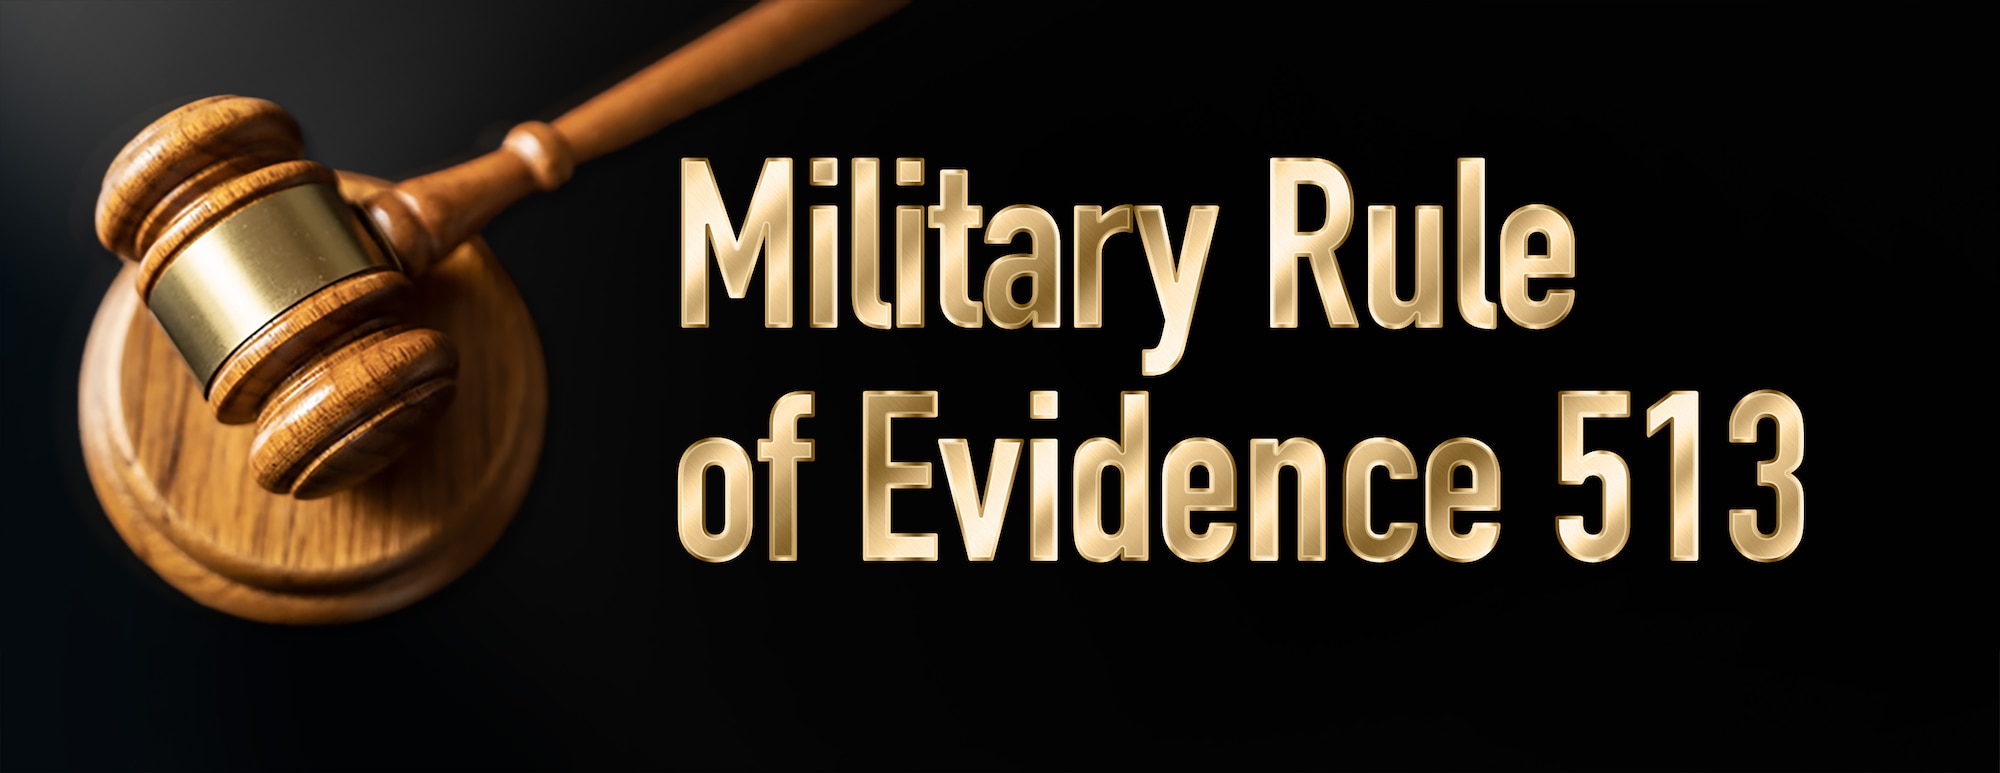 Judge's gavel on dark background with text title Military Rule of Evidence 513